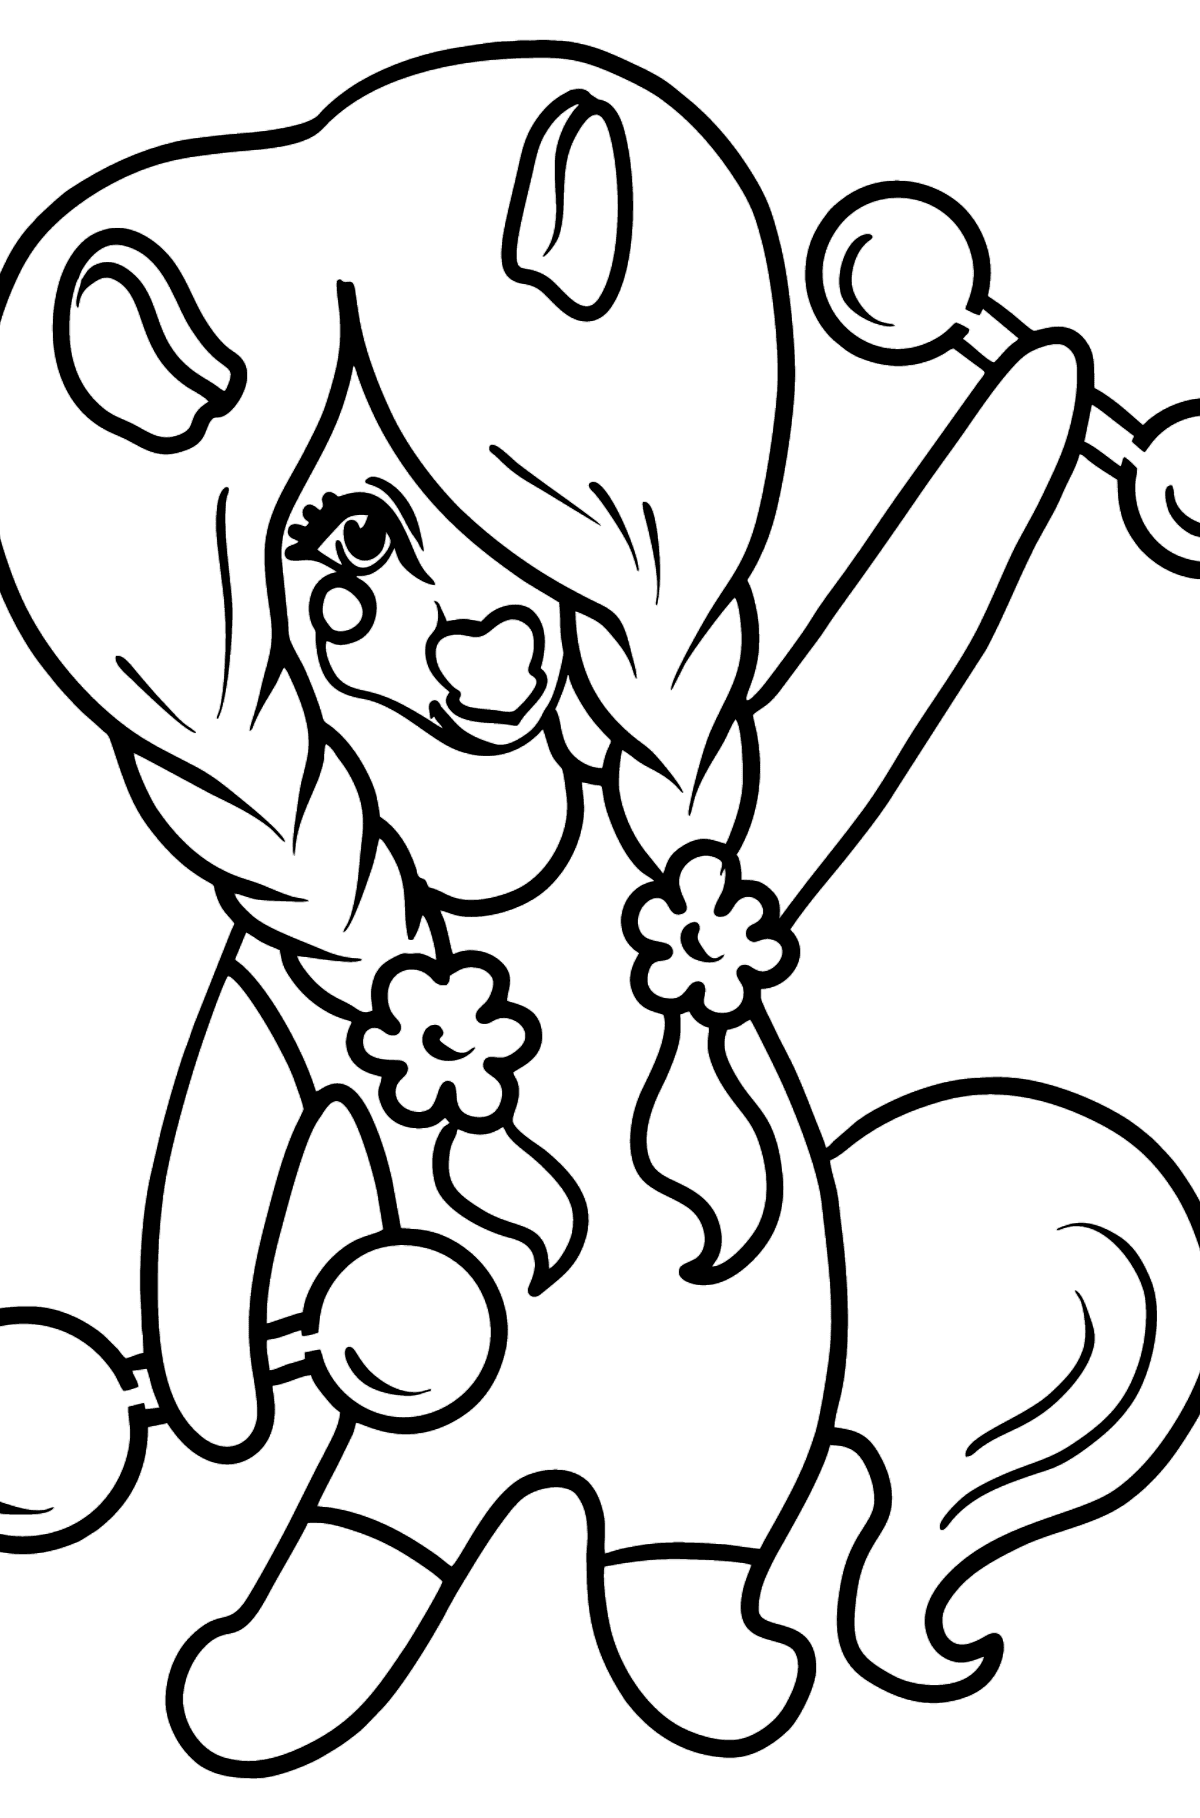 Pony Sportswoman coloring page - Coloring Pages for Kids